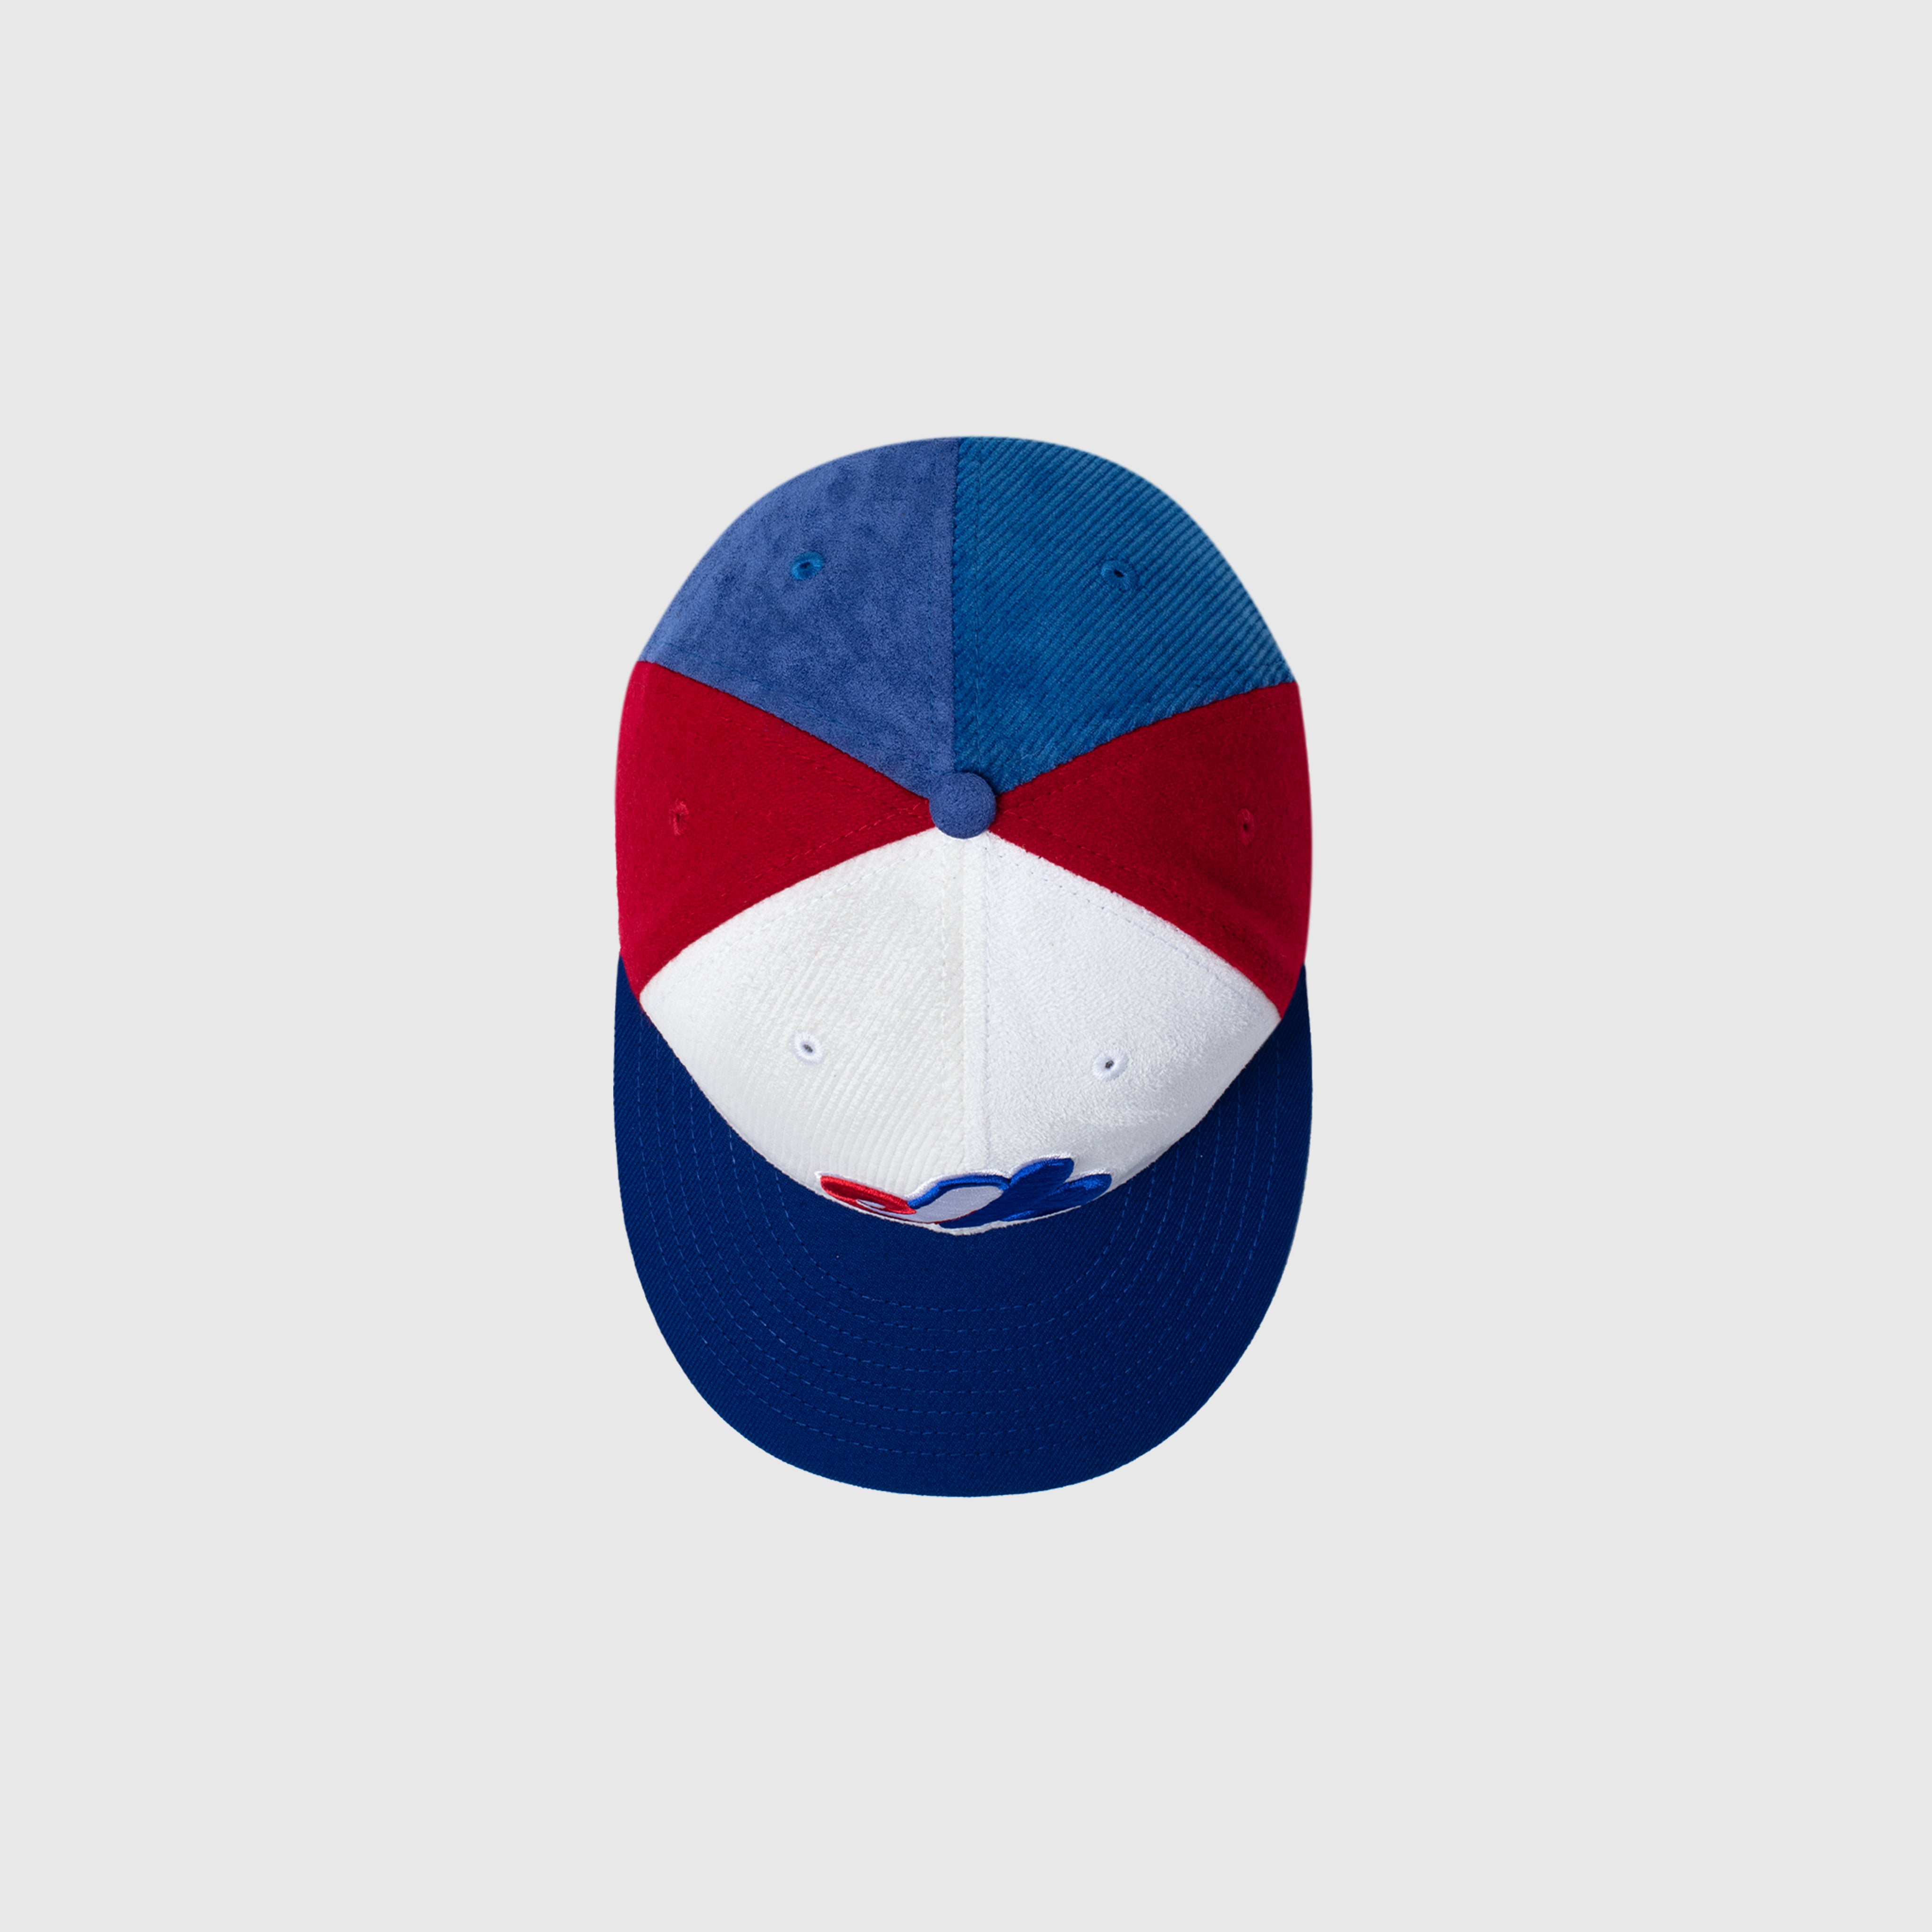 PACKER X NEW ERA MONTREAL EXPOS 59FIFTY FITTED "PATCHWORK"